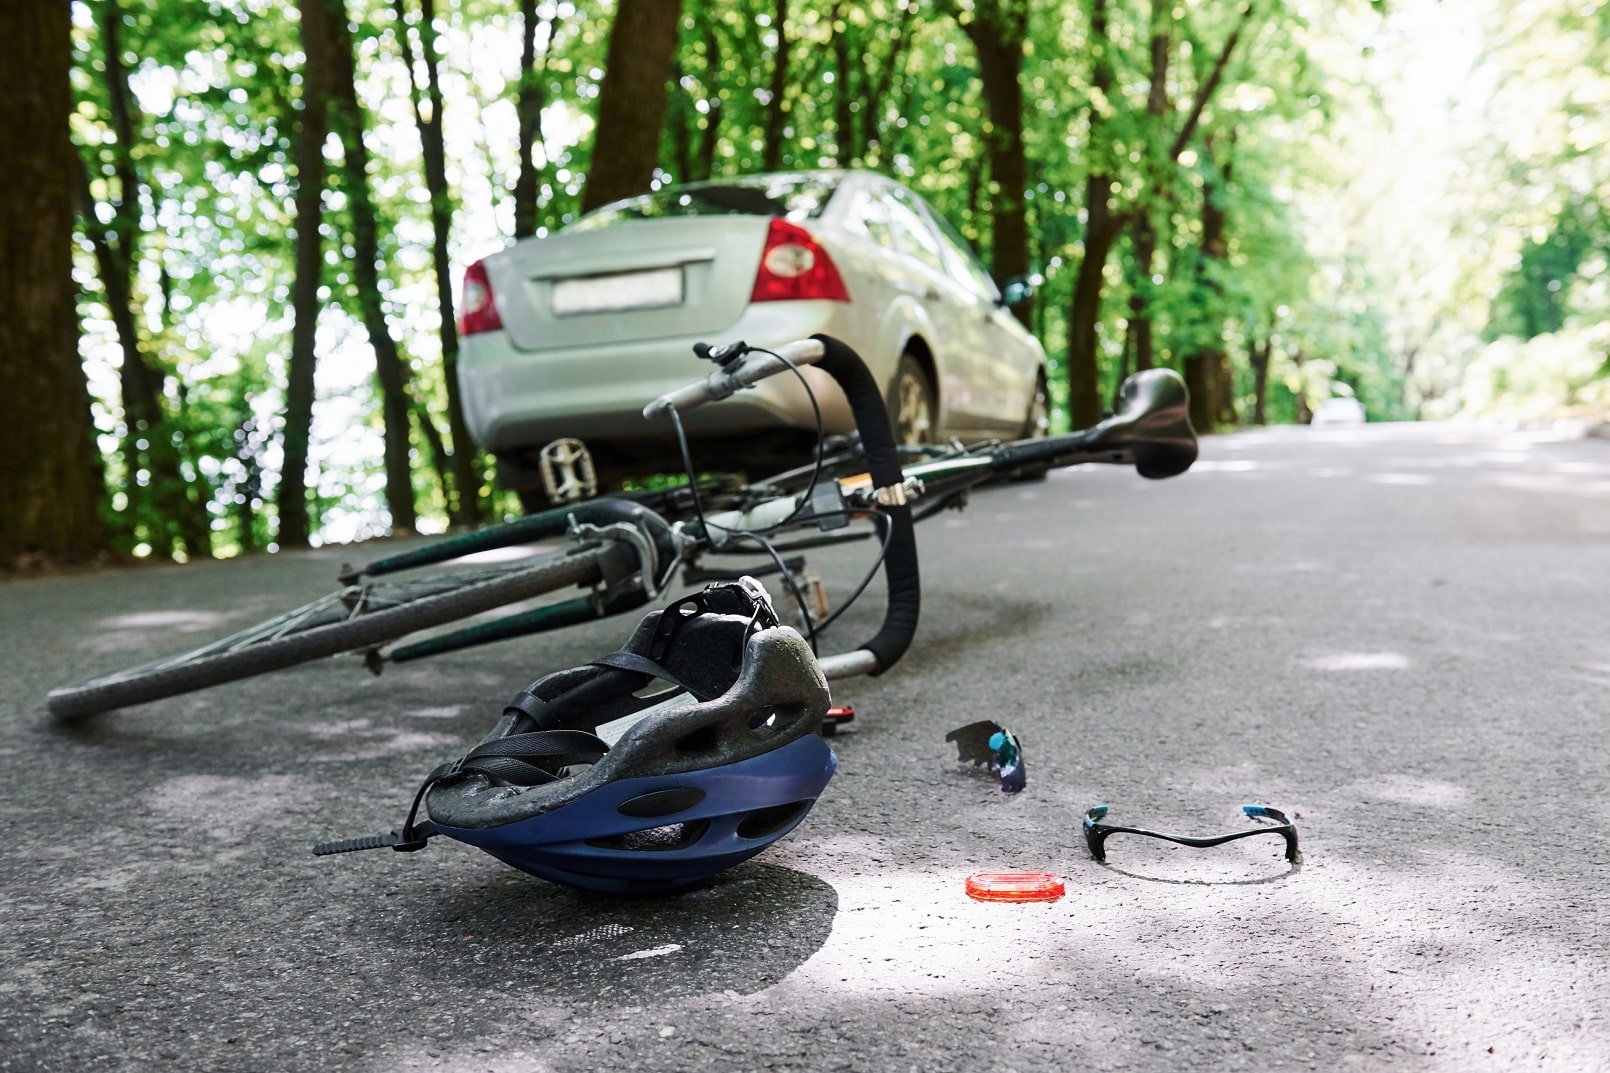 How Can a Lawyer Help After Suffering a Head Injury in a Bicycle Accident?